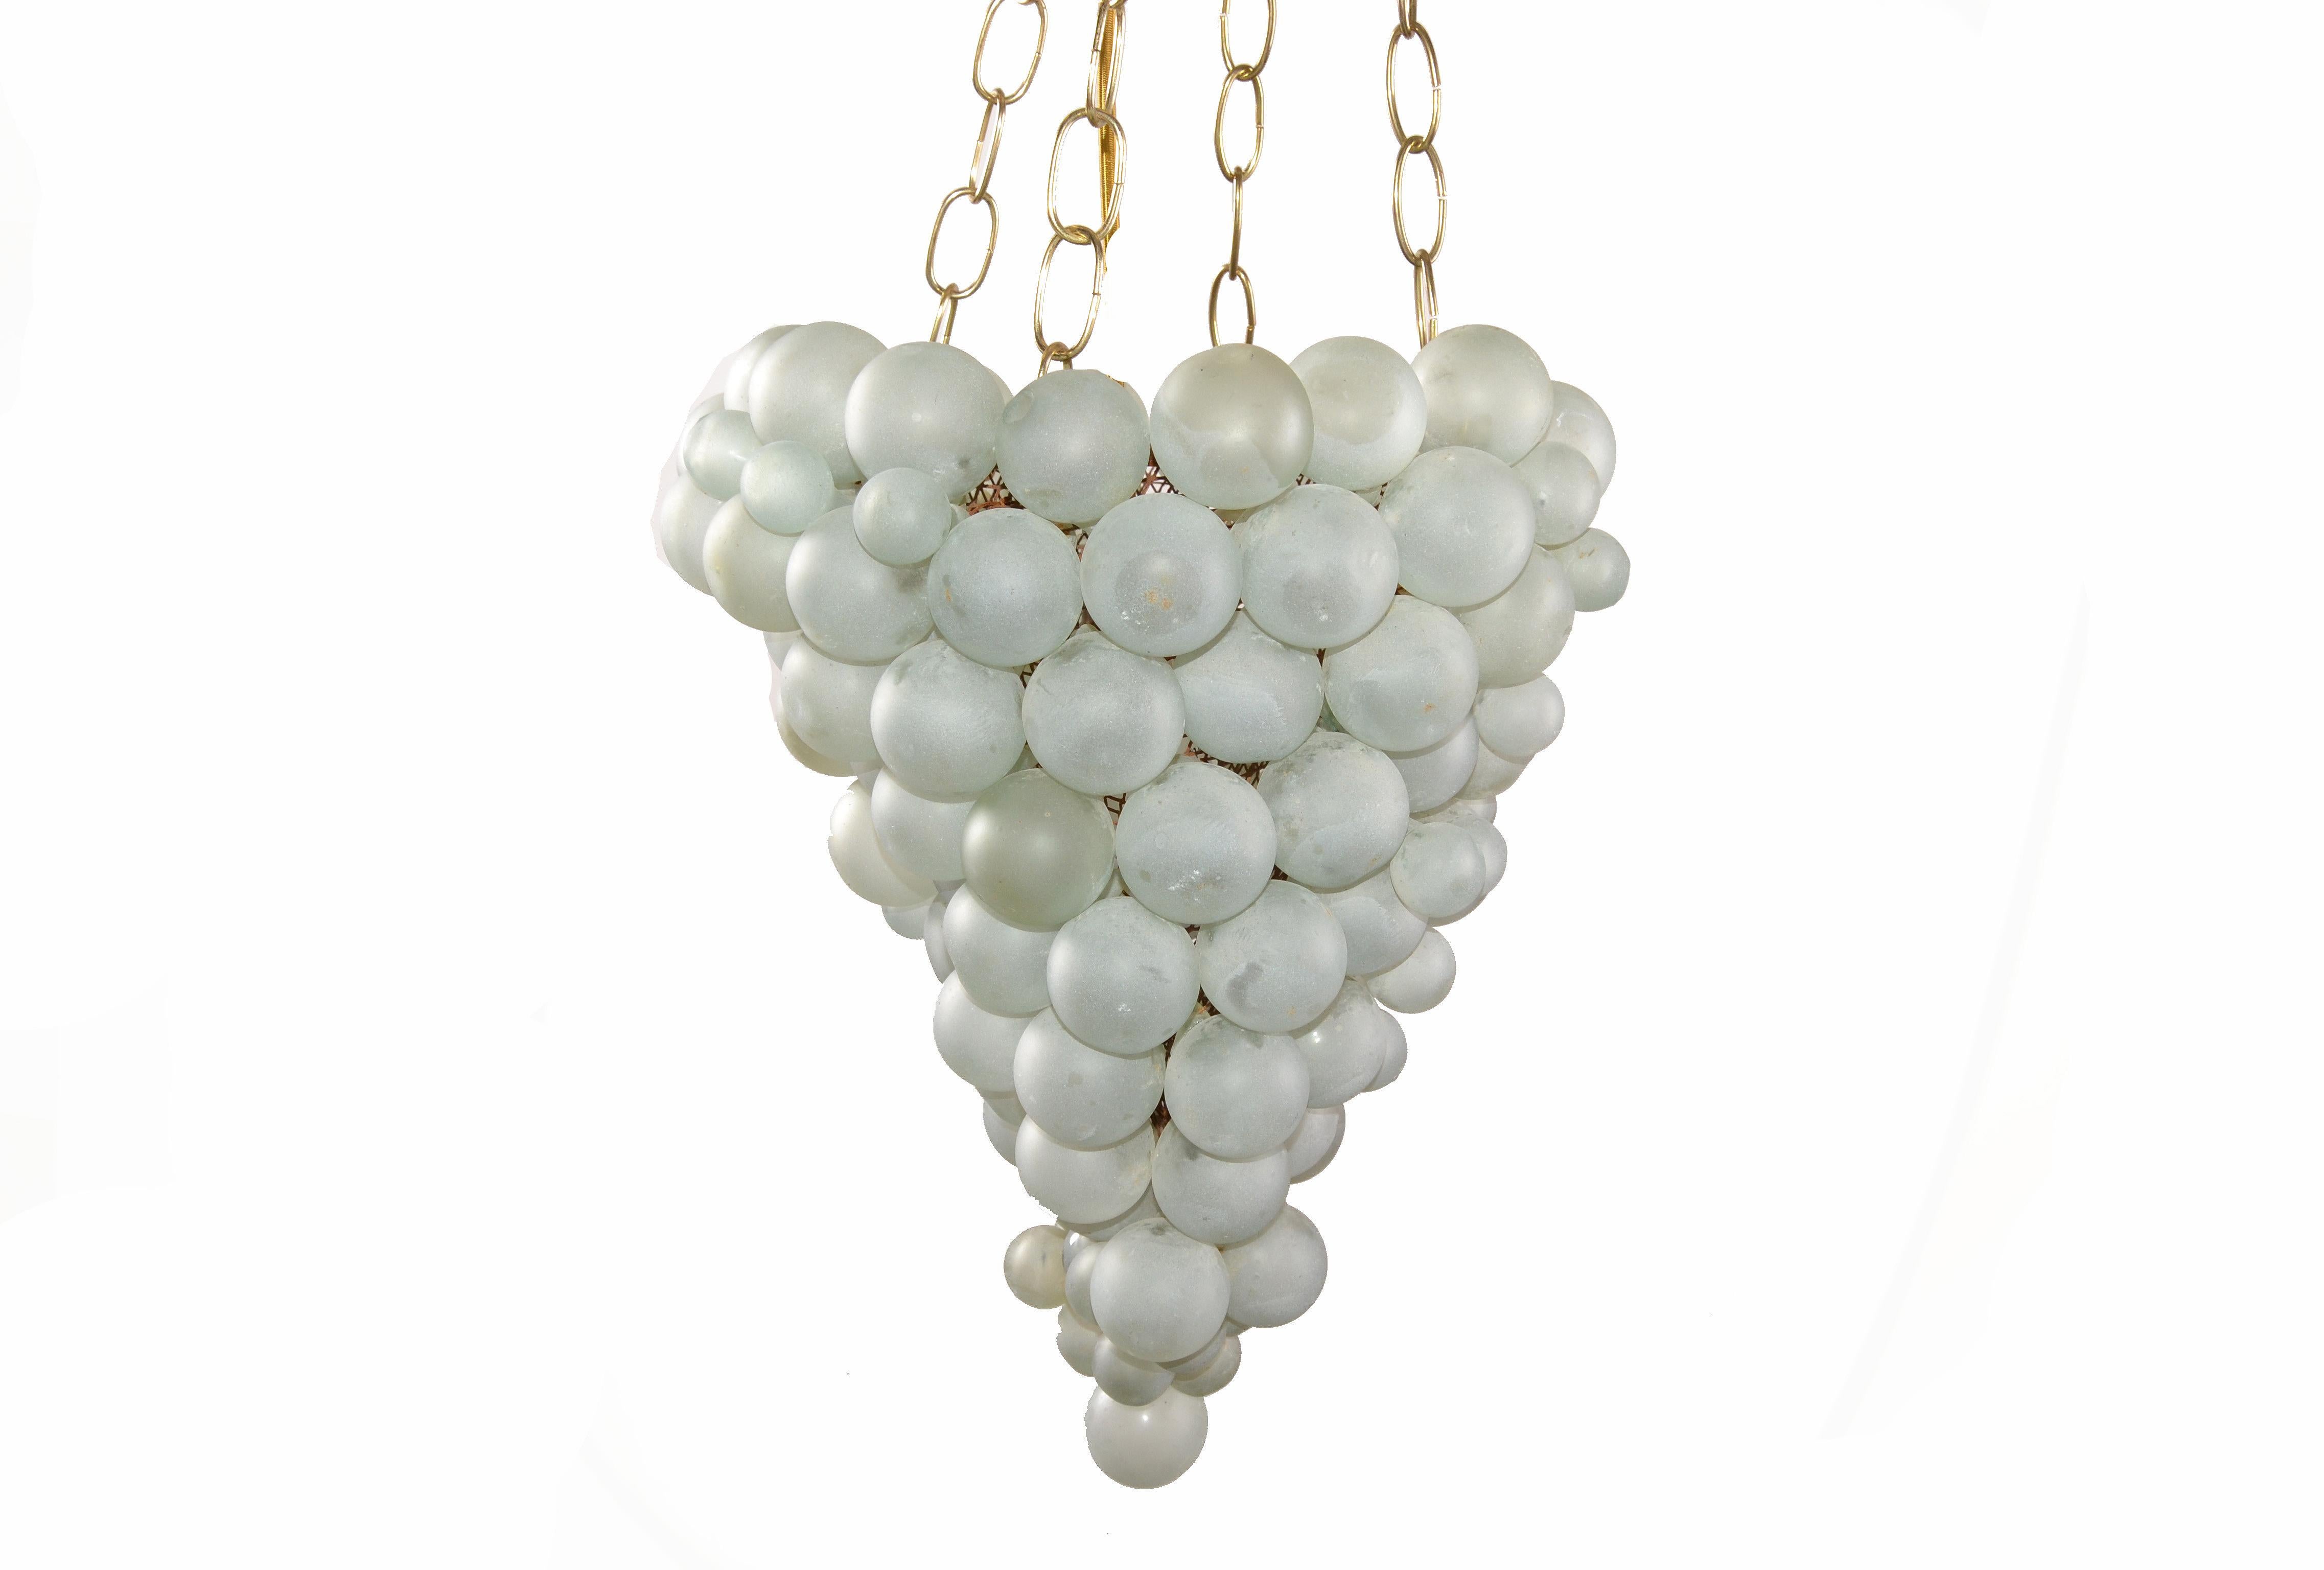 Large Italian Mid-Century Modern blown Murano glass balls in grape shape chandelier.
The different glass balls are mounted onto a wire basket and is hanging on 4 brass chains.
Takes one light bulb with max. 100 watts.
Great piece for Your Home